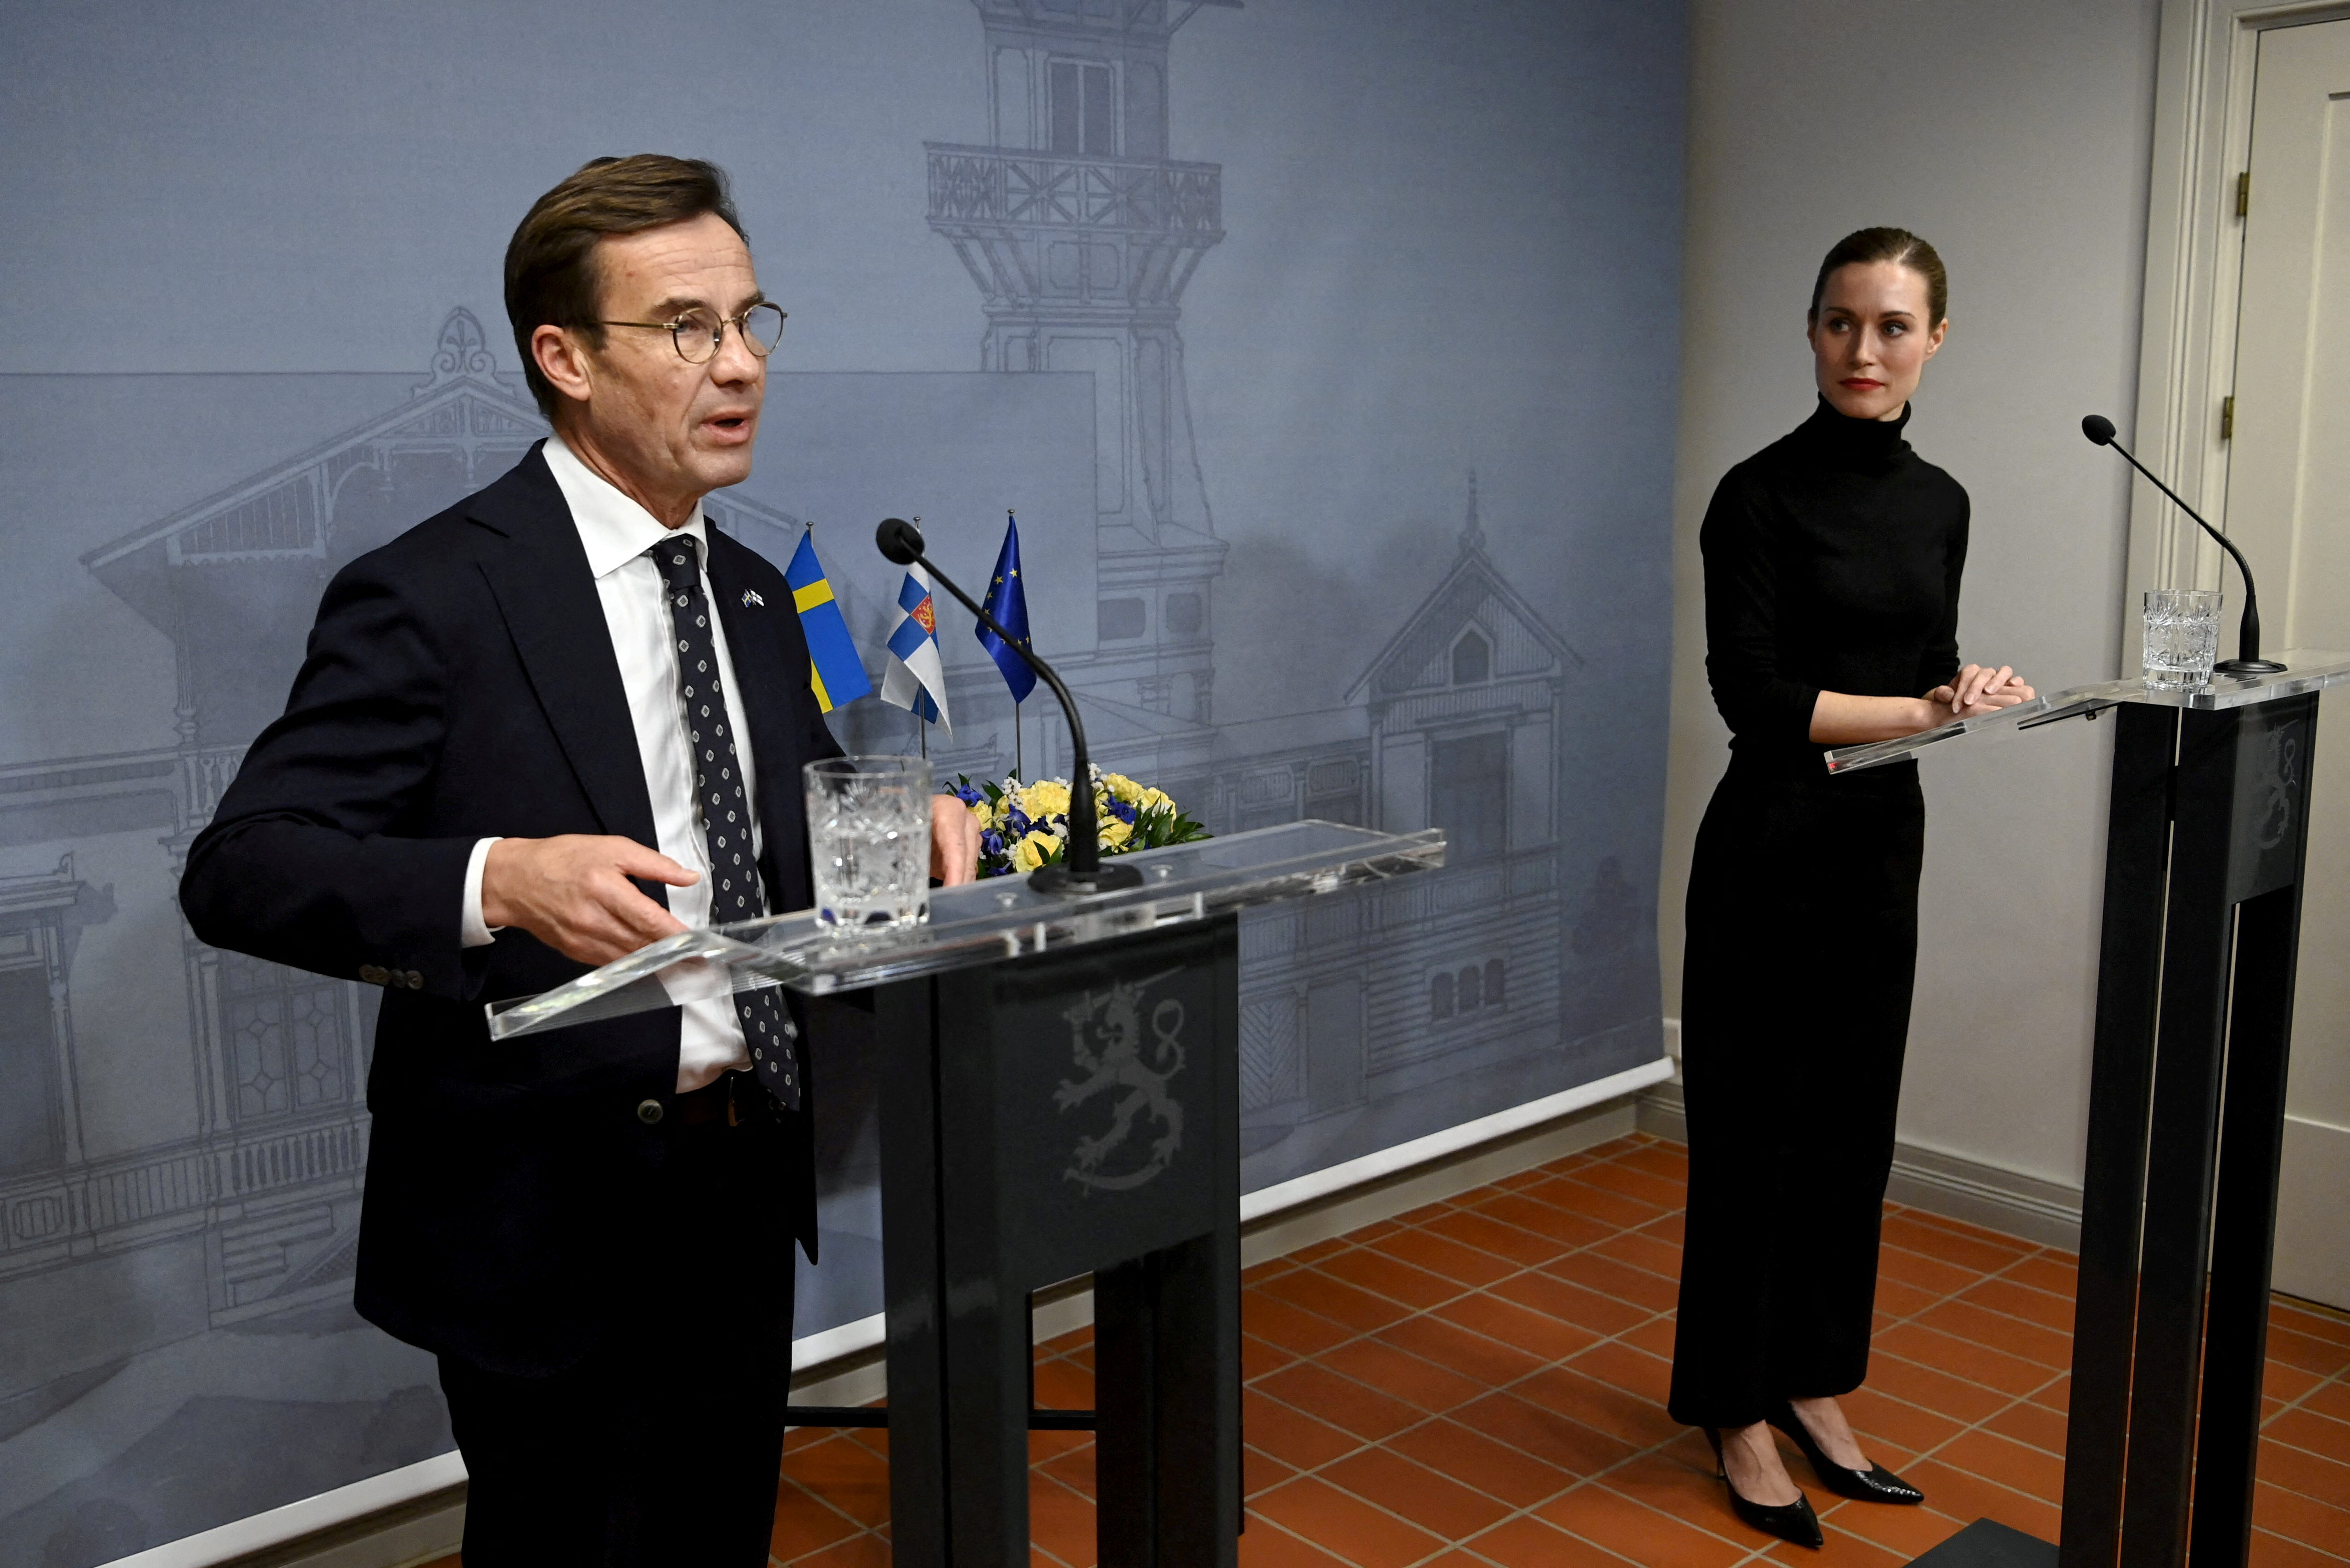 Sweden's PM Ulf Kristersson in Finland